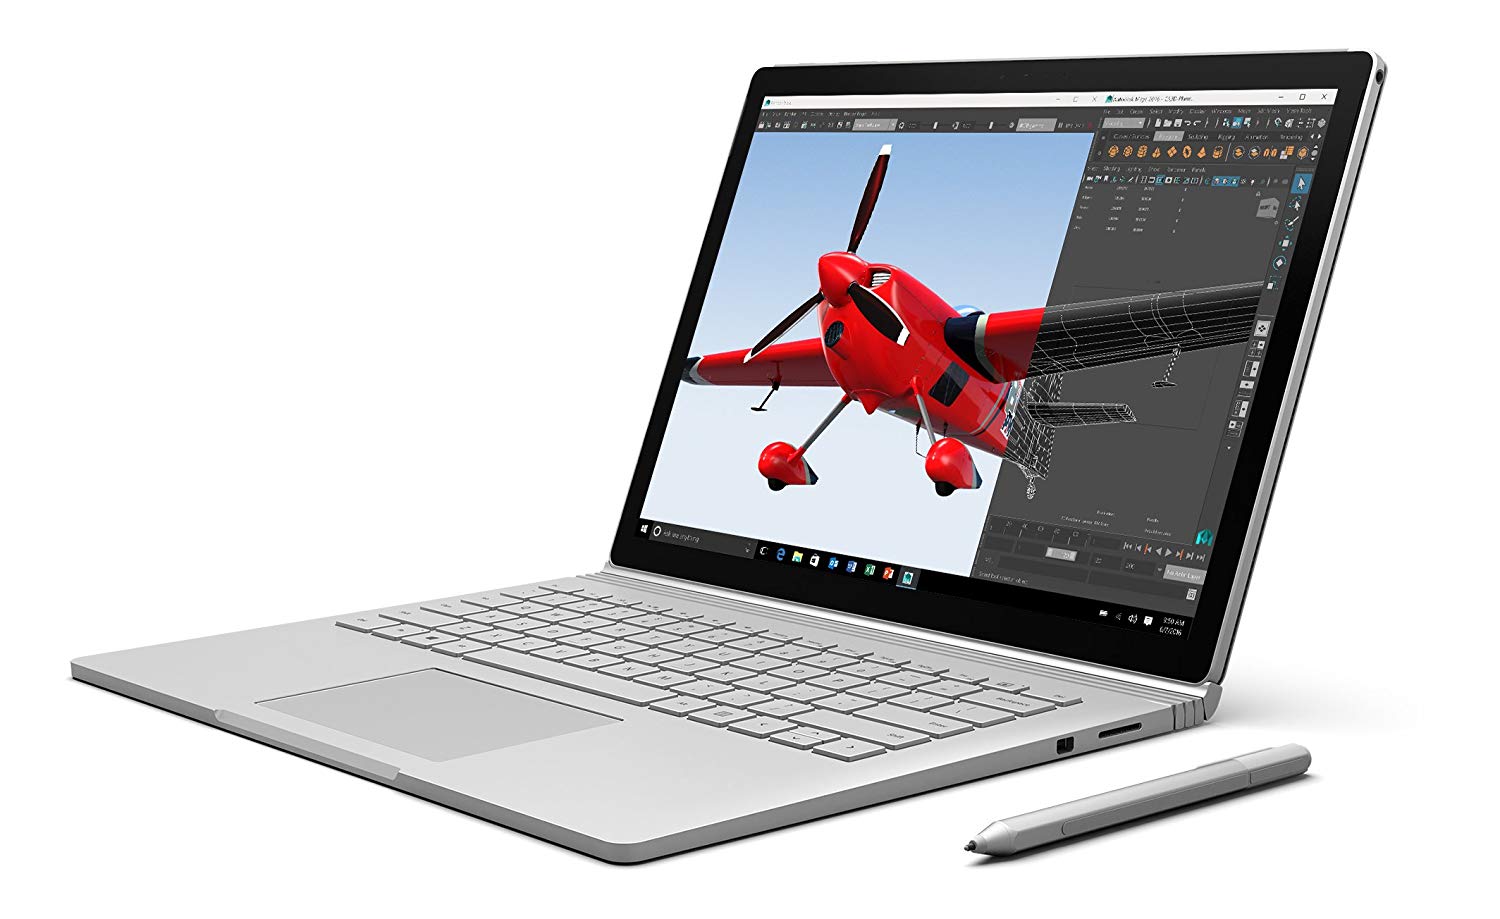 Buy Surface book online